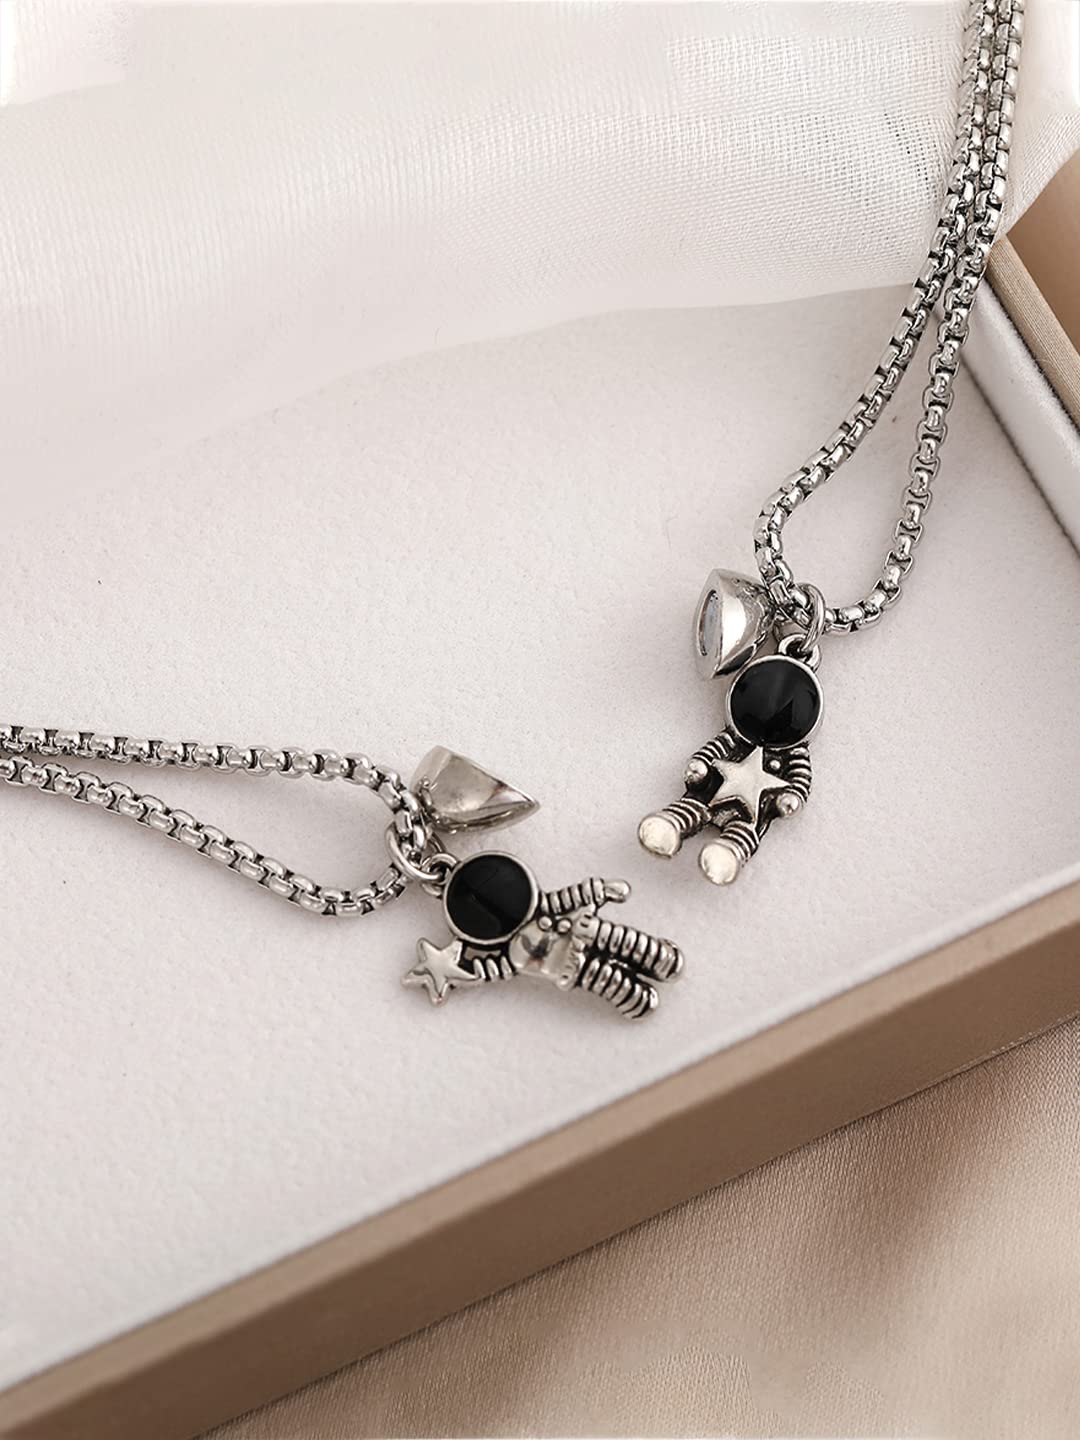 Black Silver Cross Necklace, Stainless Steel Black & Silver Cross Pendant  Necklace for Men Women [FREE MAILING], Women's Fashion, Jewelry &  Organisers, Necklaces on Carousell